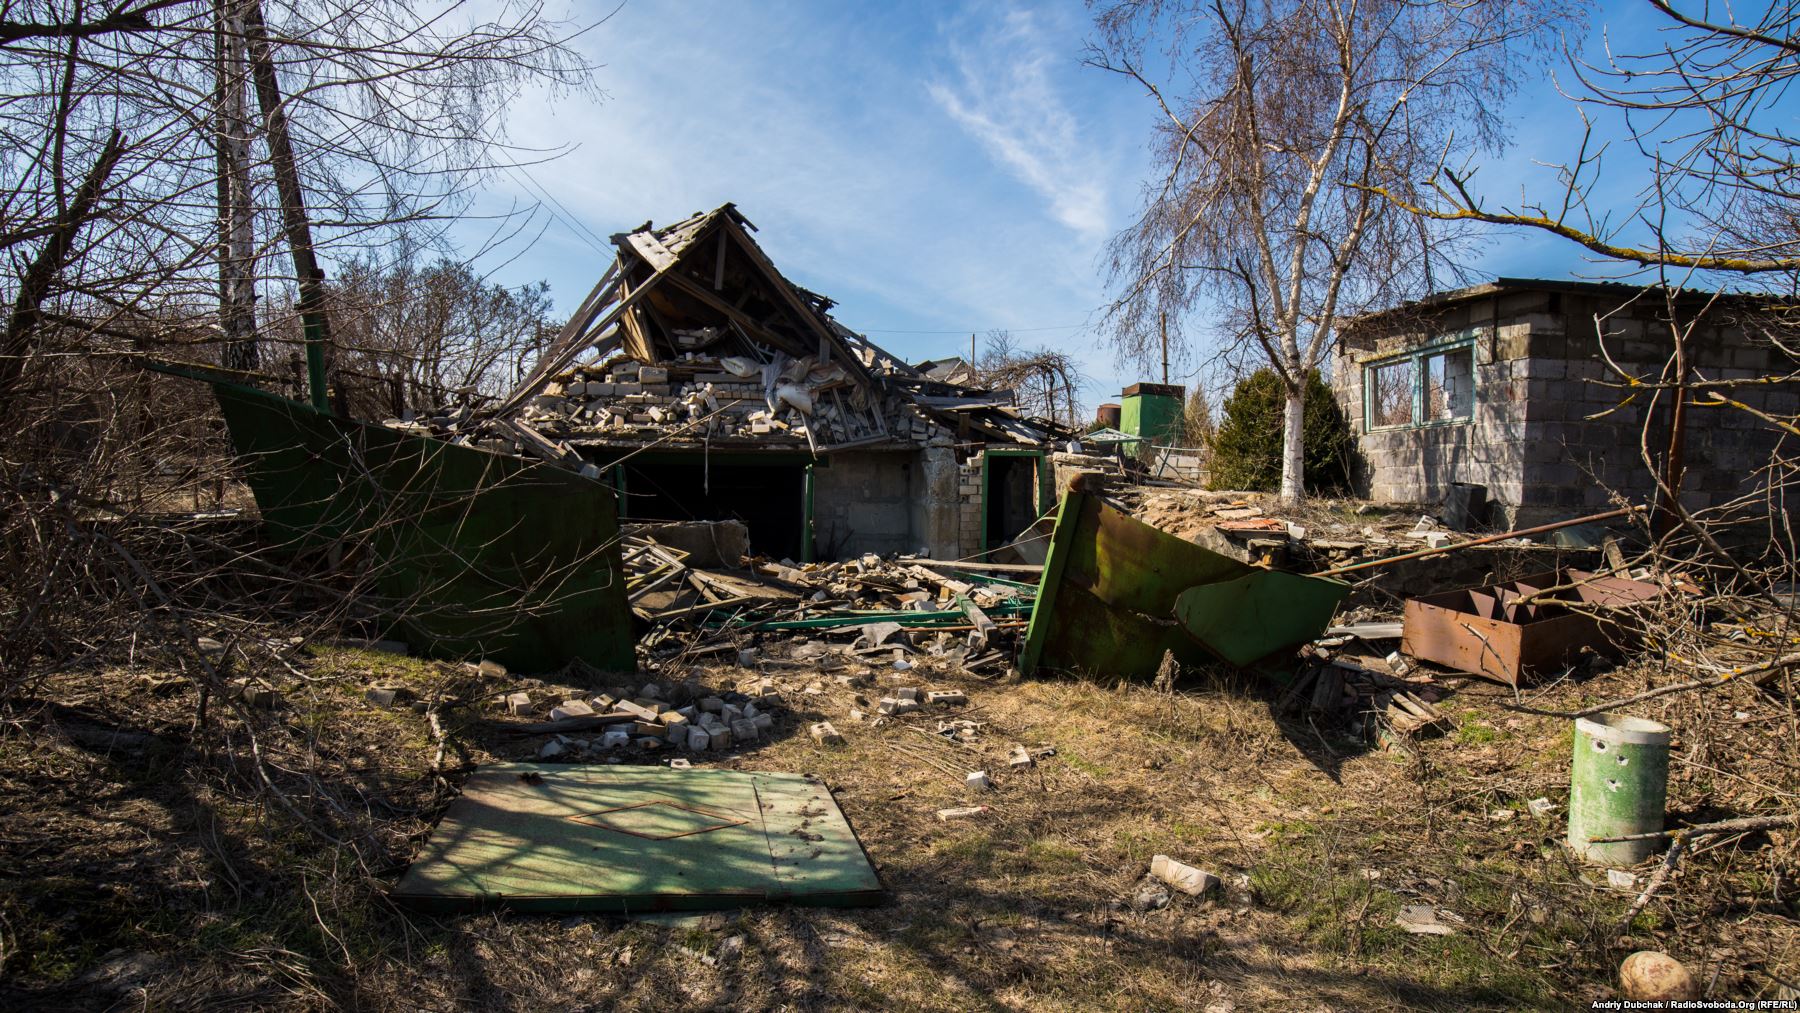 Another destroyed dacha in the village. Photo by: Andriy Dubchak